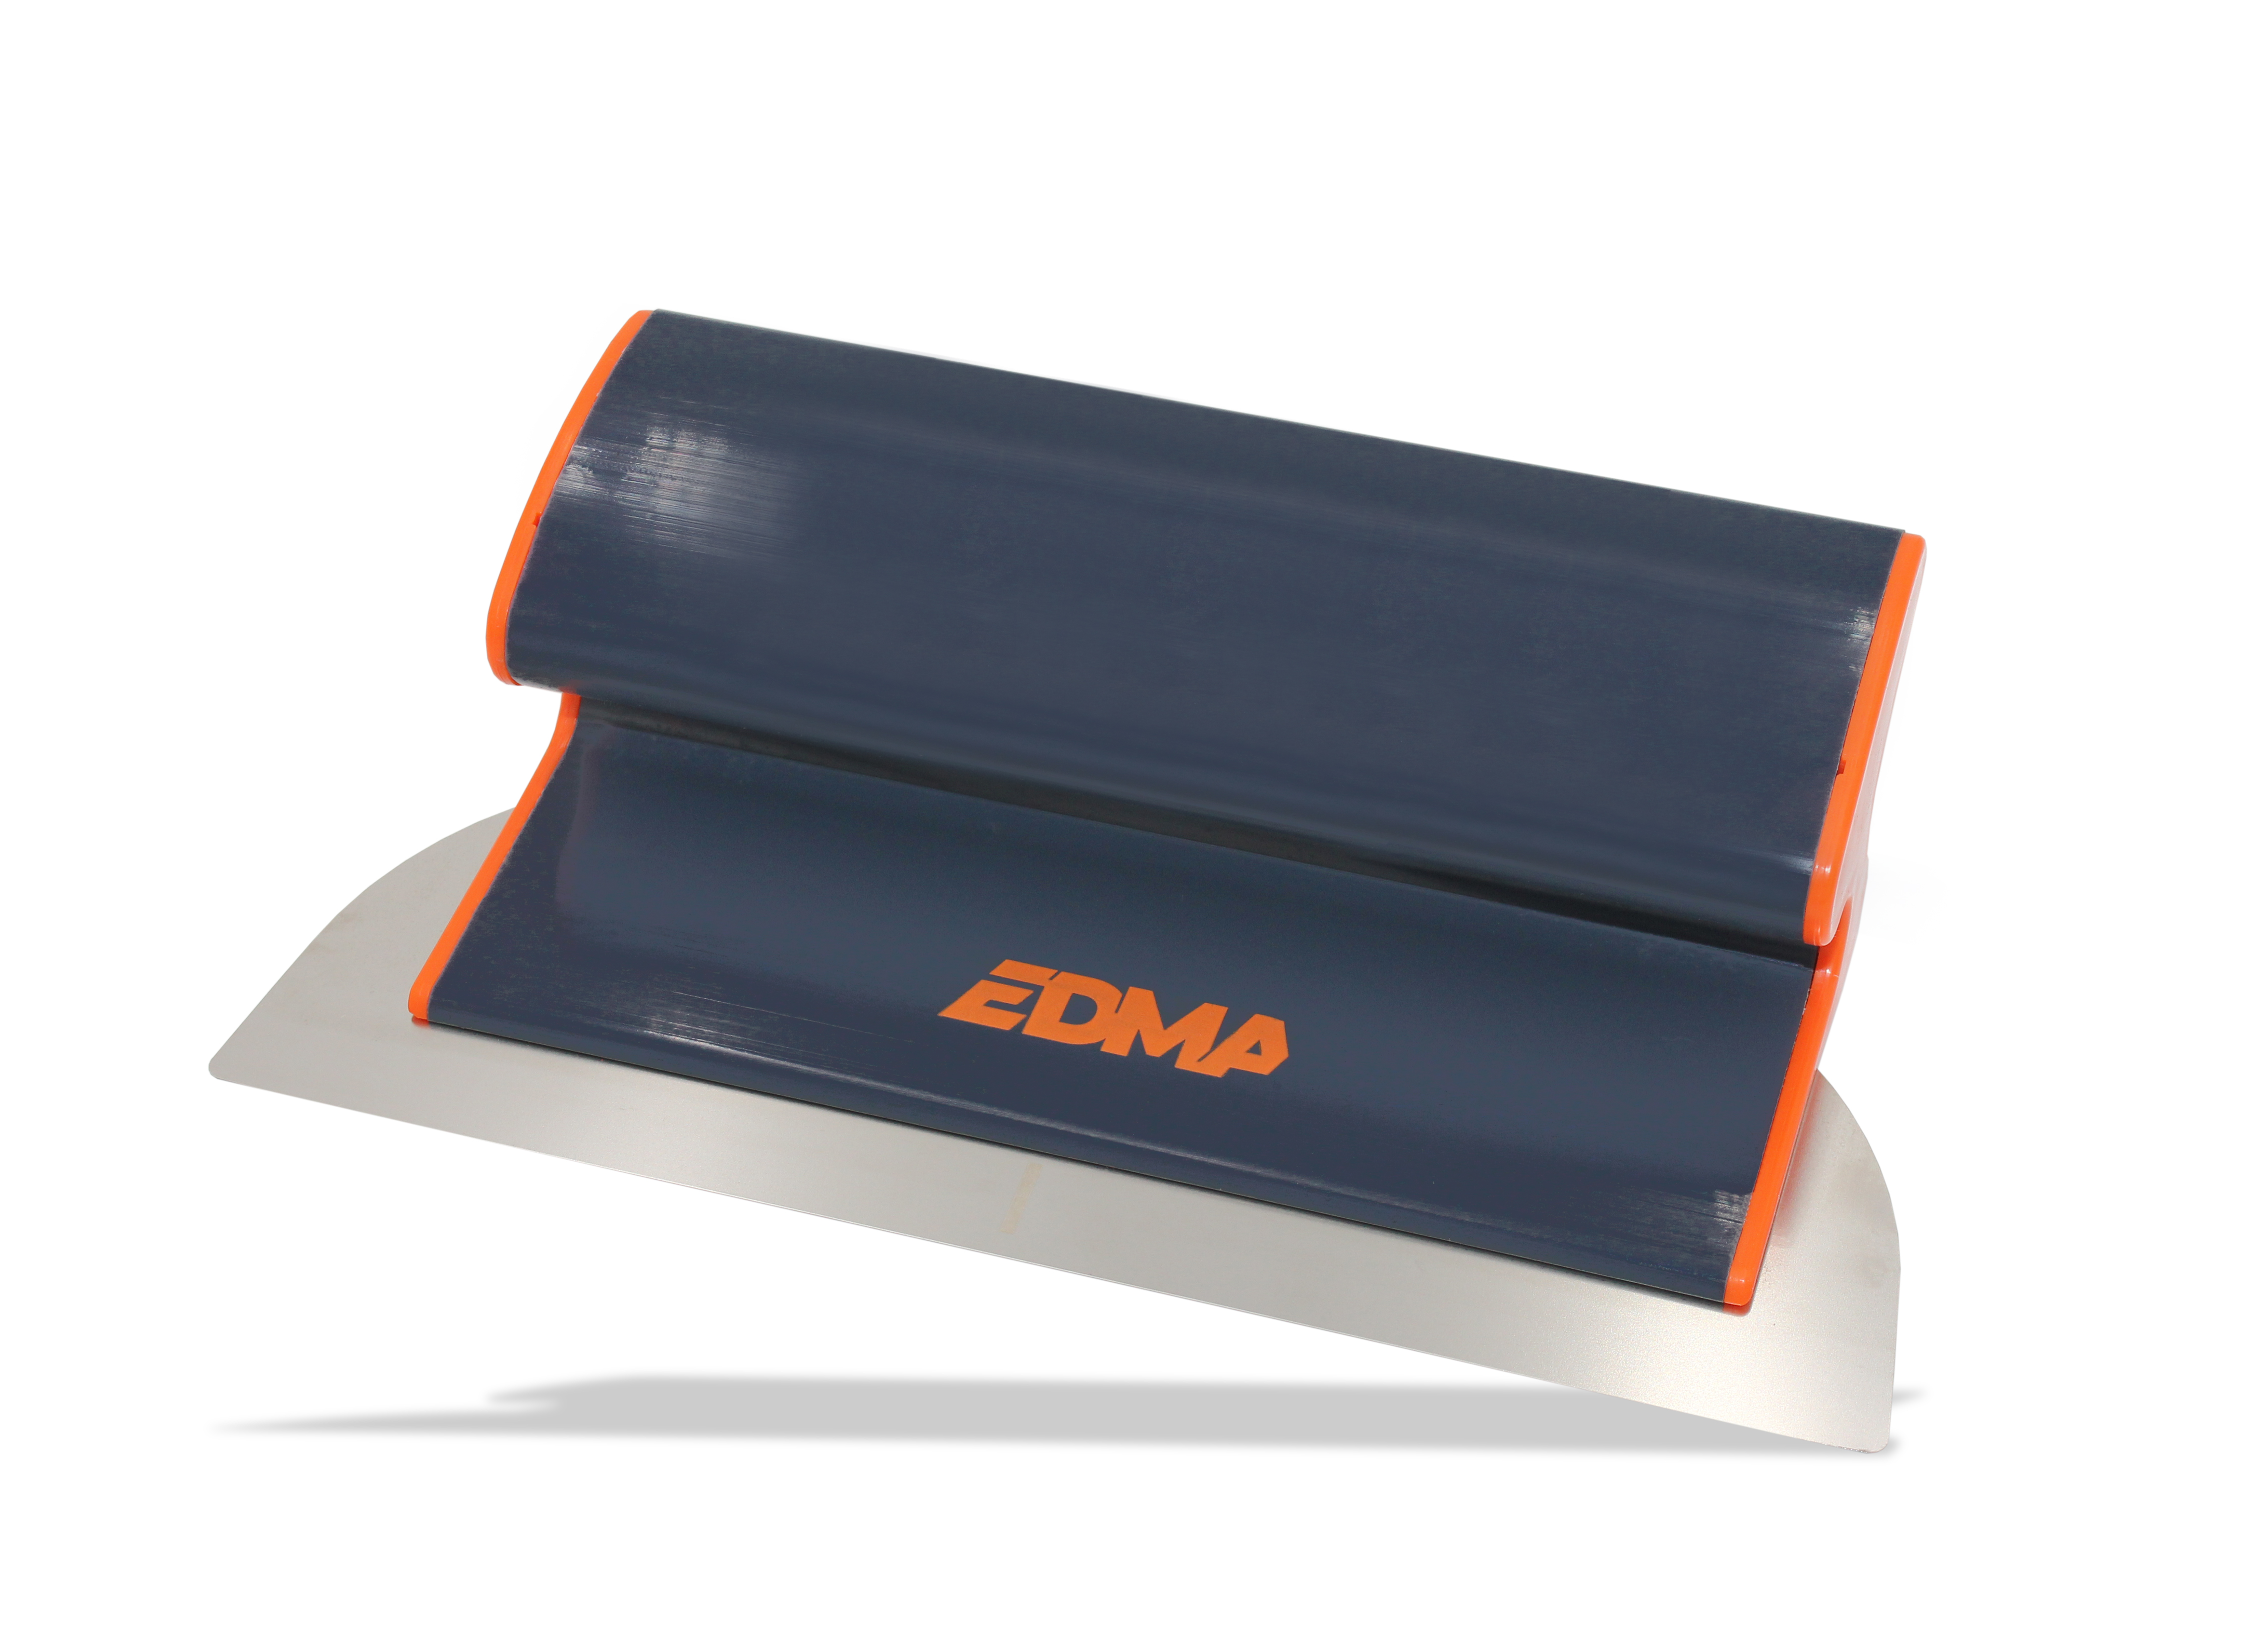 EDMA launches a brand new range of smoothing blades, named EDMABLADE.